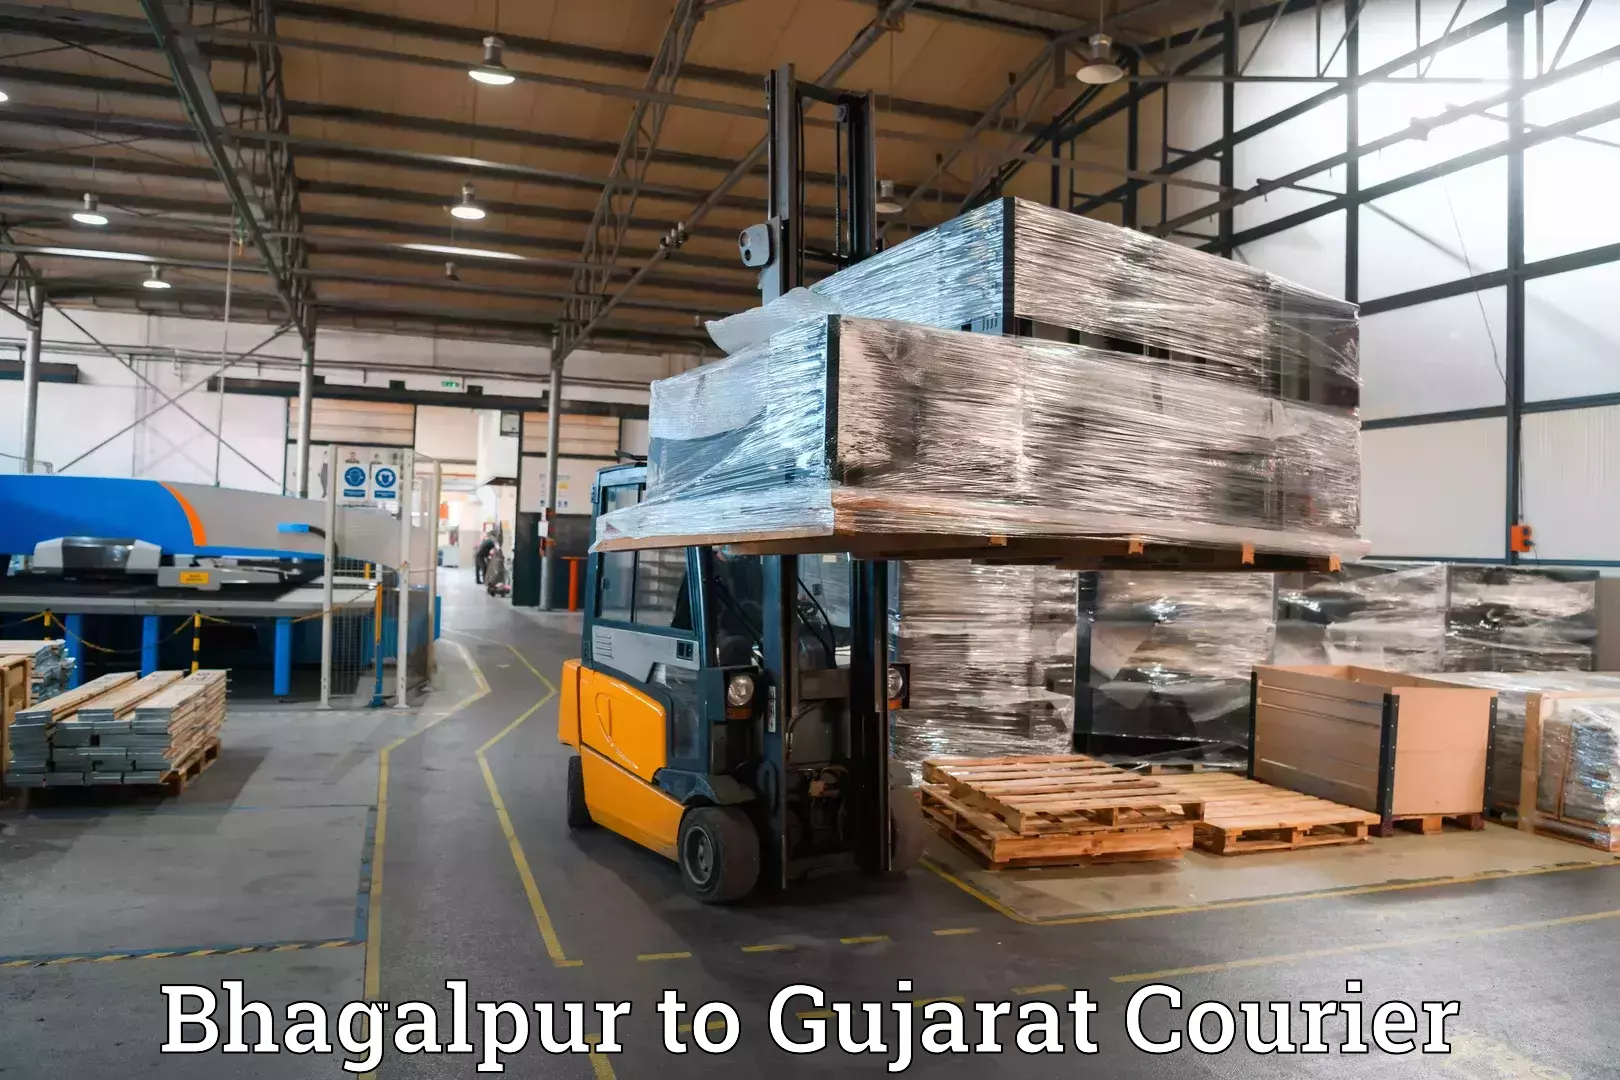 Baggage shipping experts Bhagalpur to Dholka